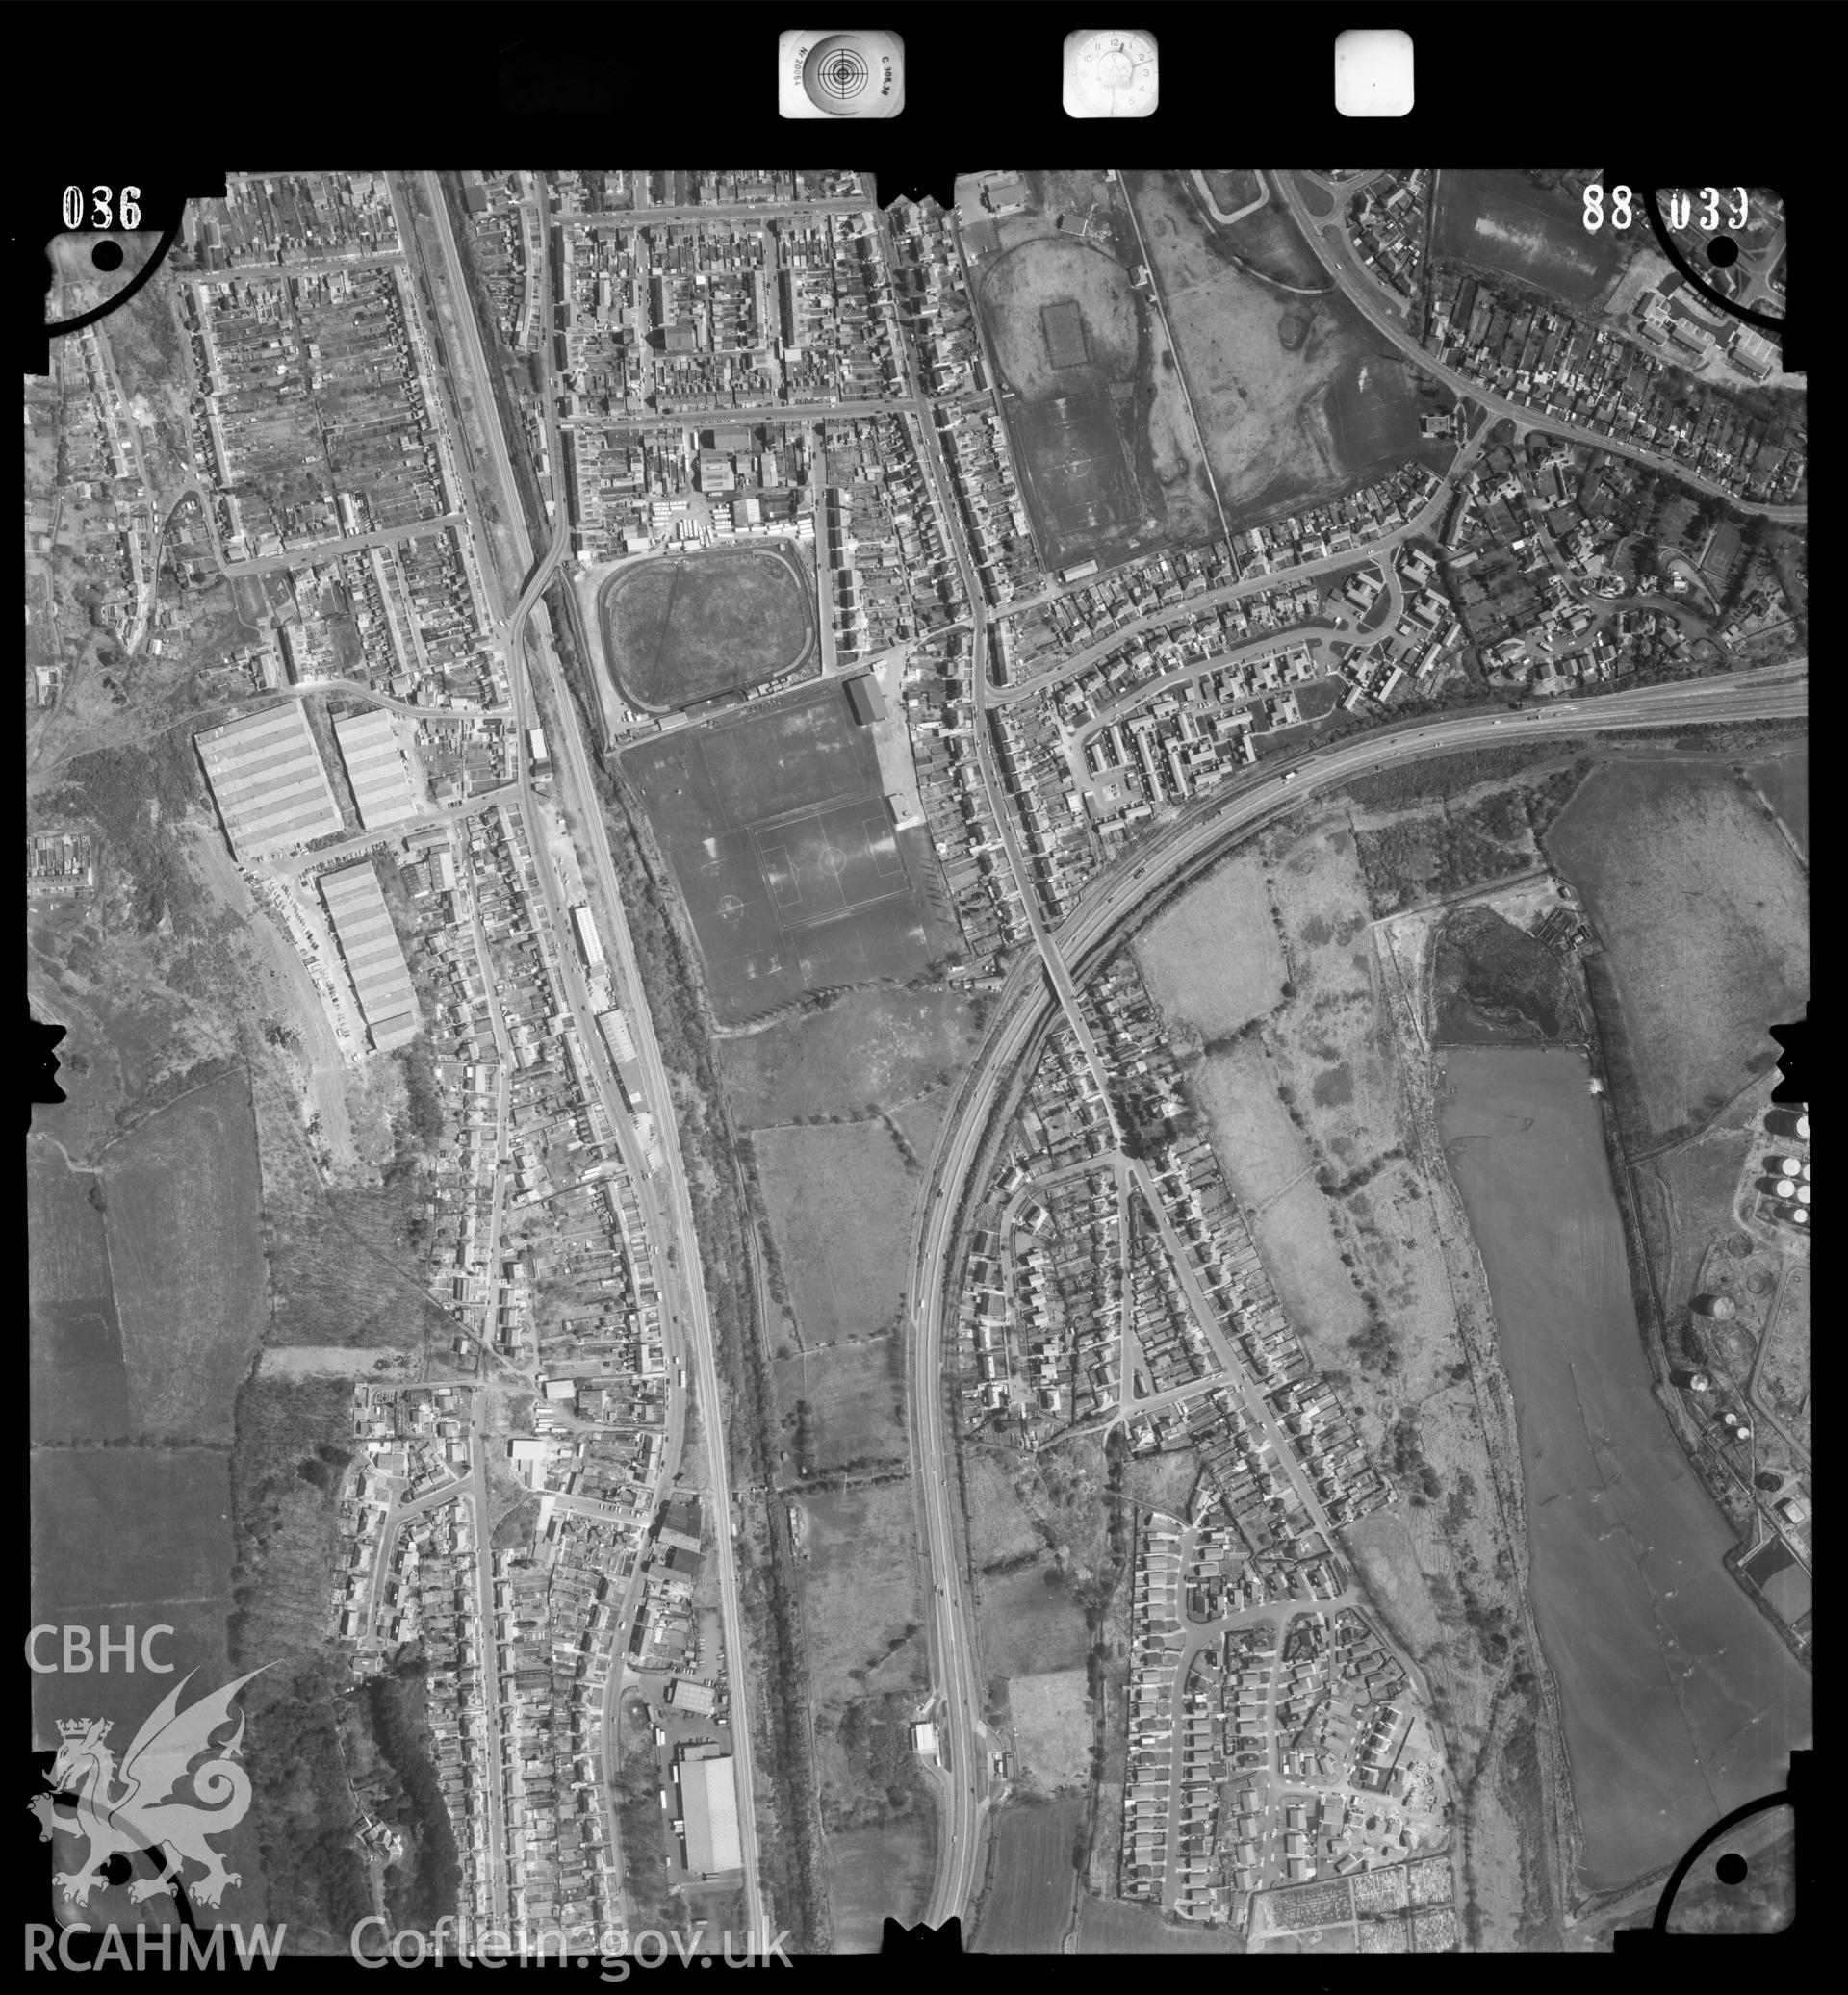 Digitized copy of an aerial photograph showing the Cefn Parc area near Skewen, taken by Ordnance Survey, 1988.